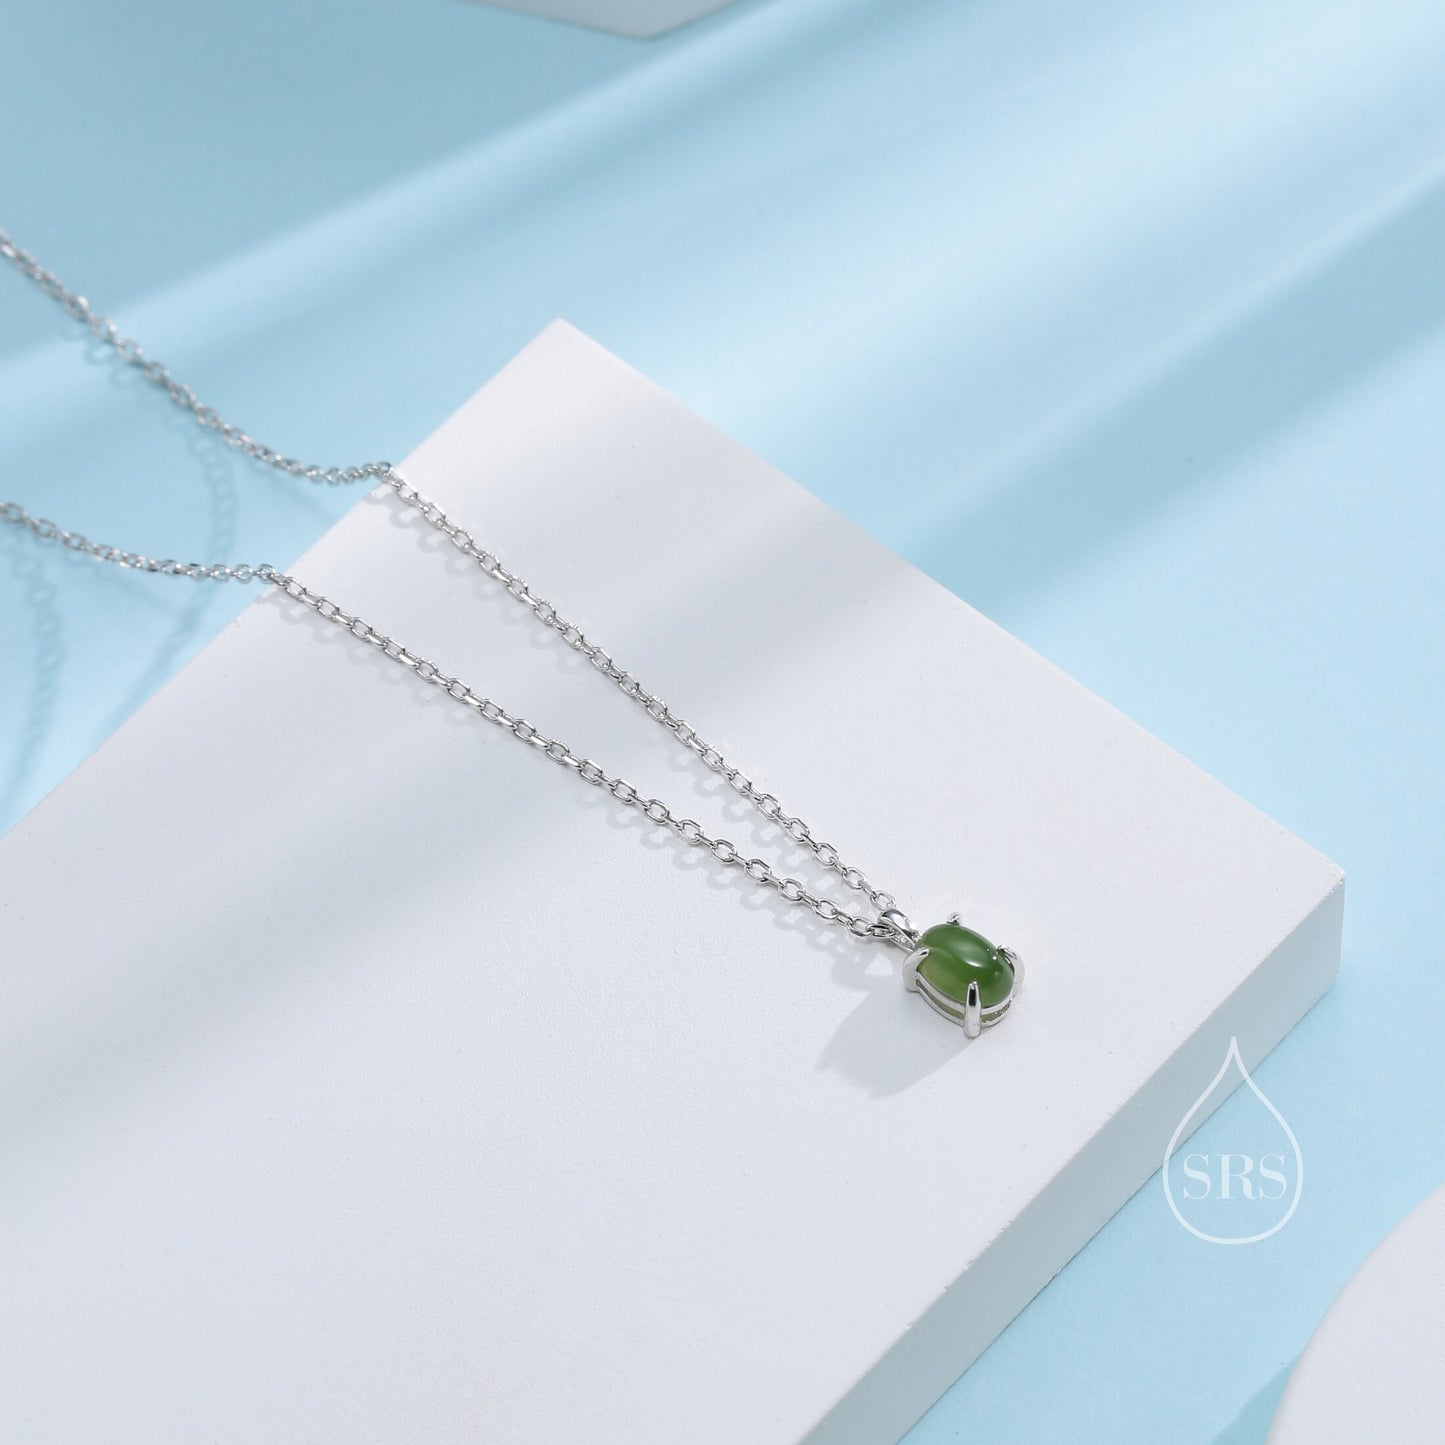 Genuine Green Jade Oval Necklace in Sterling Silver, 4x6mm Dainty Jade Oval Cabochon Necklace, Natural Jade Necklace